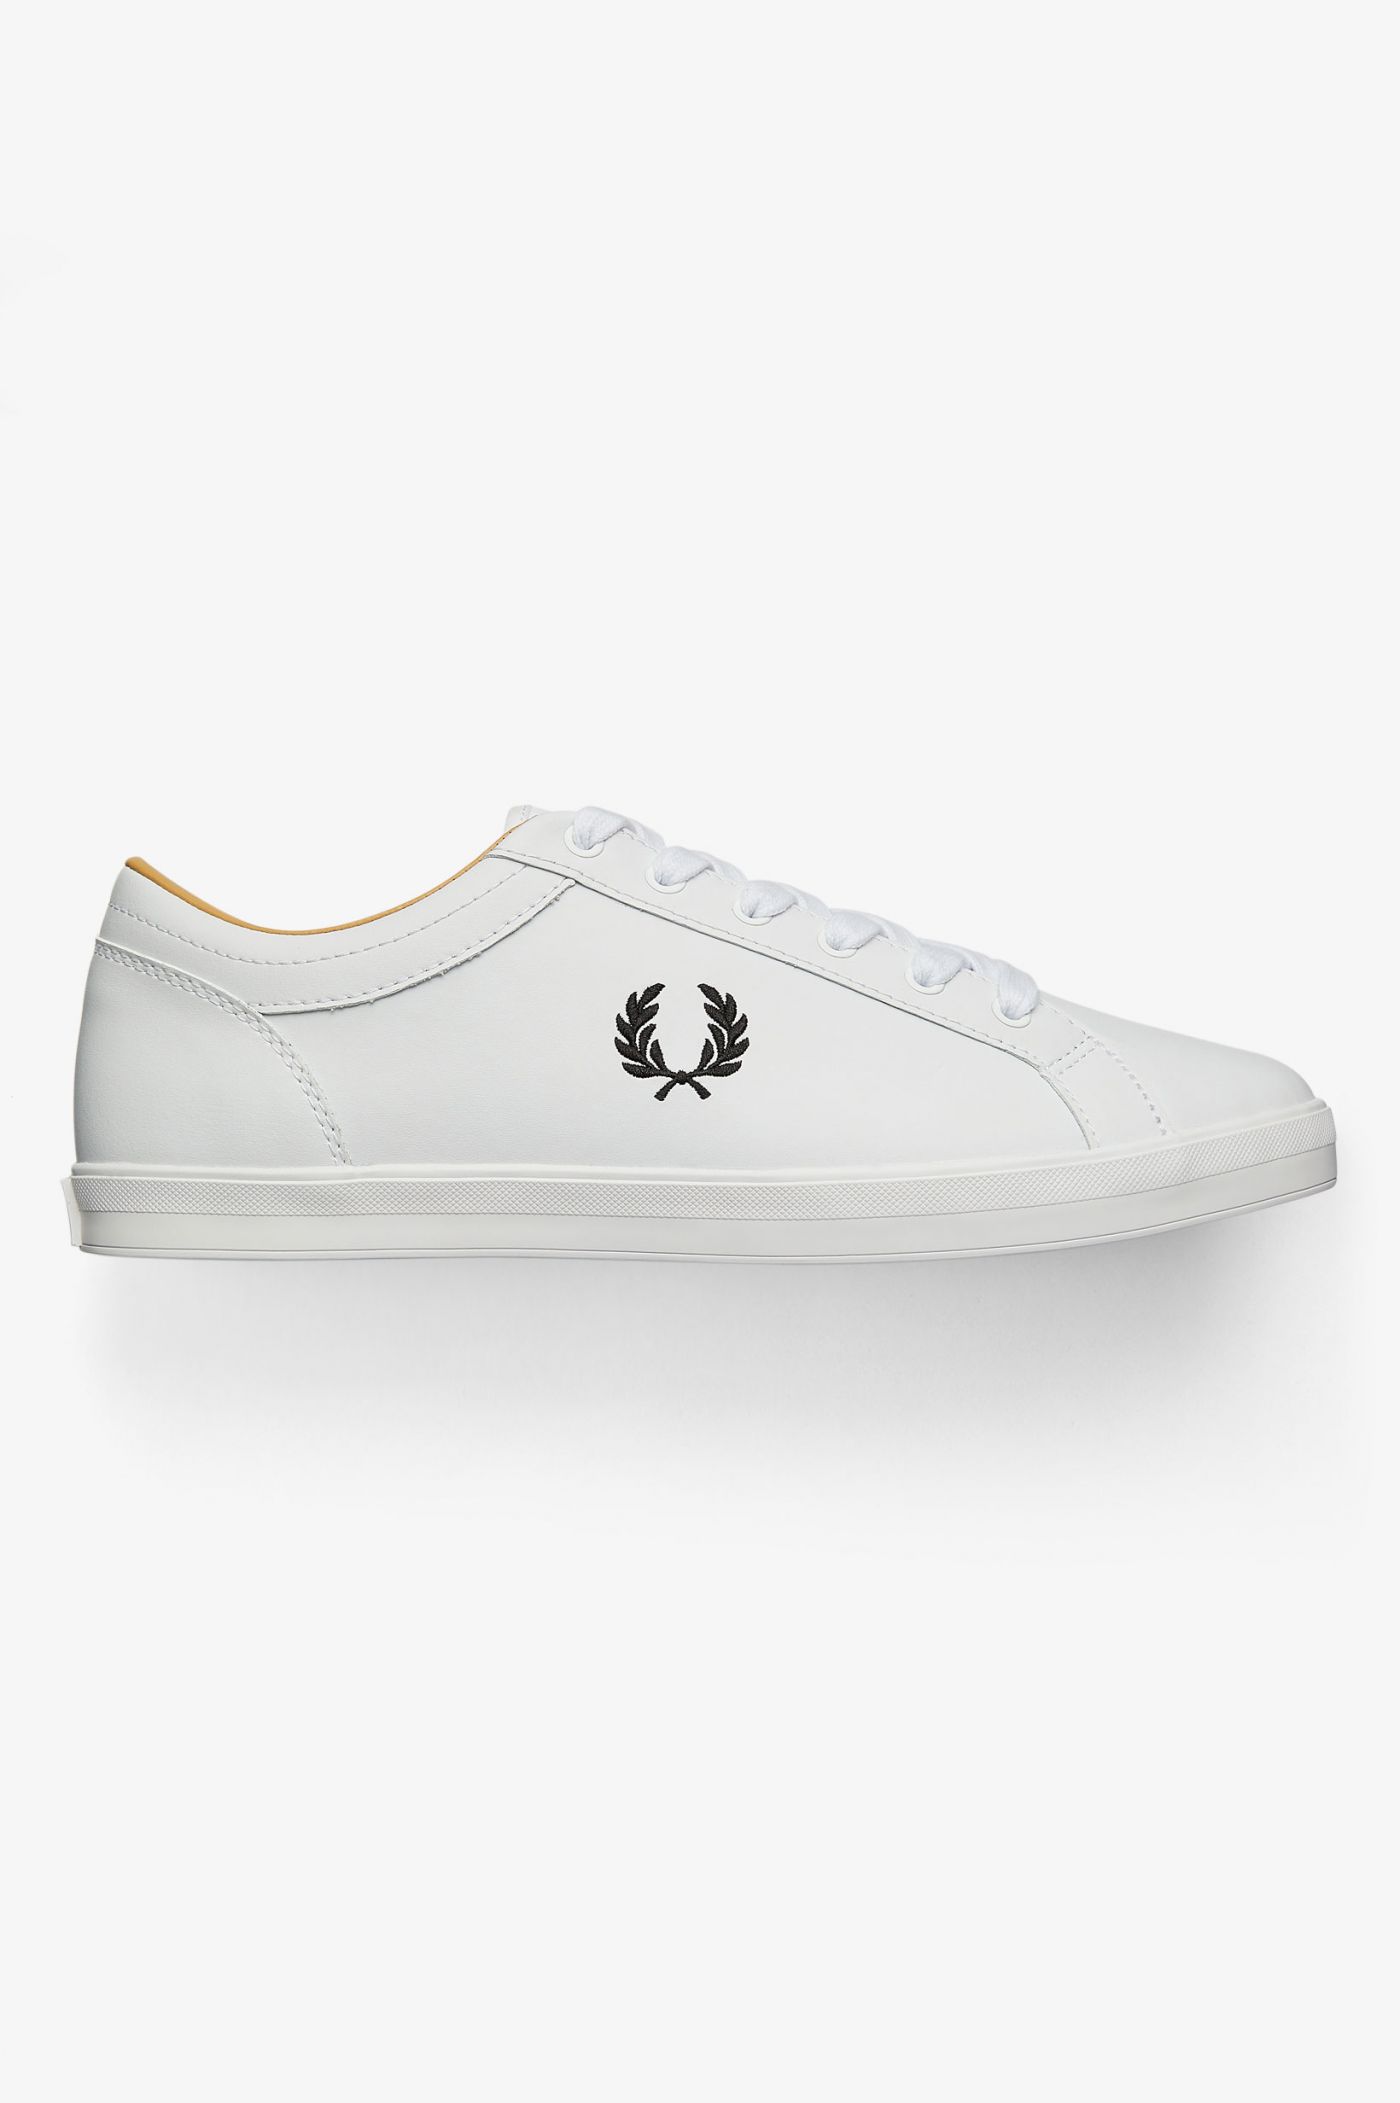 fred perry baseline trainers black